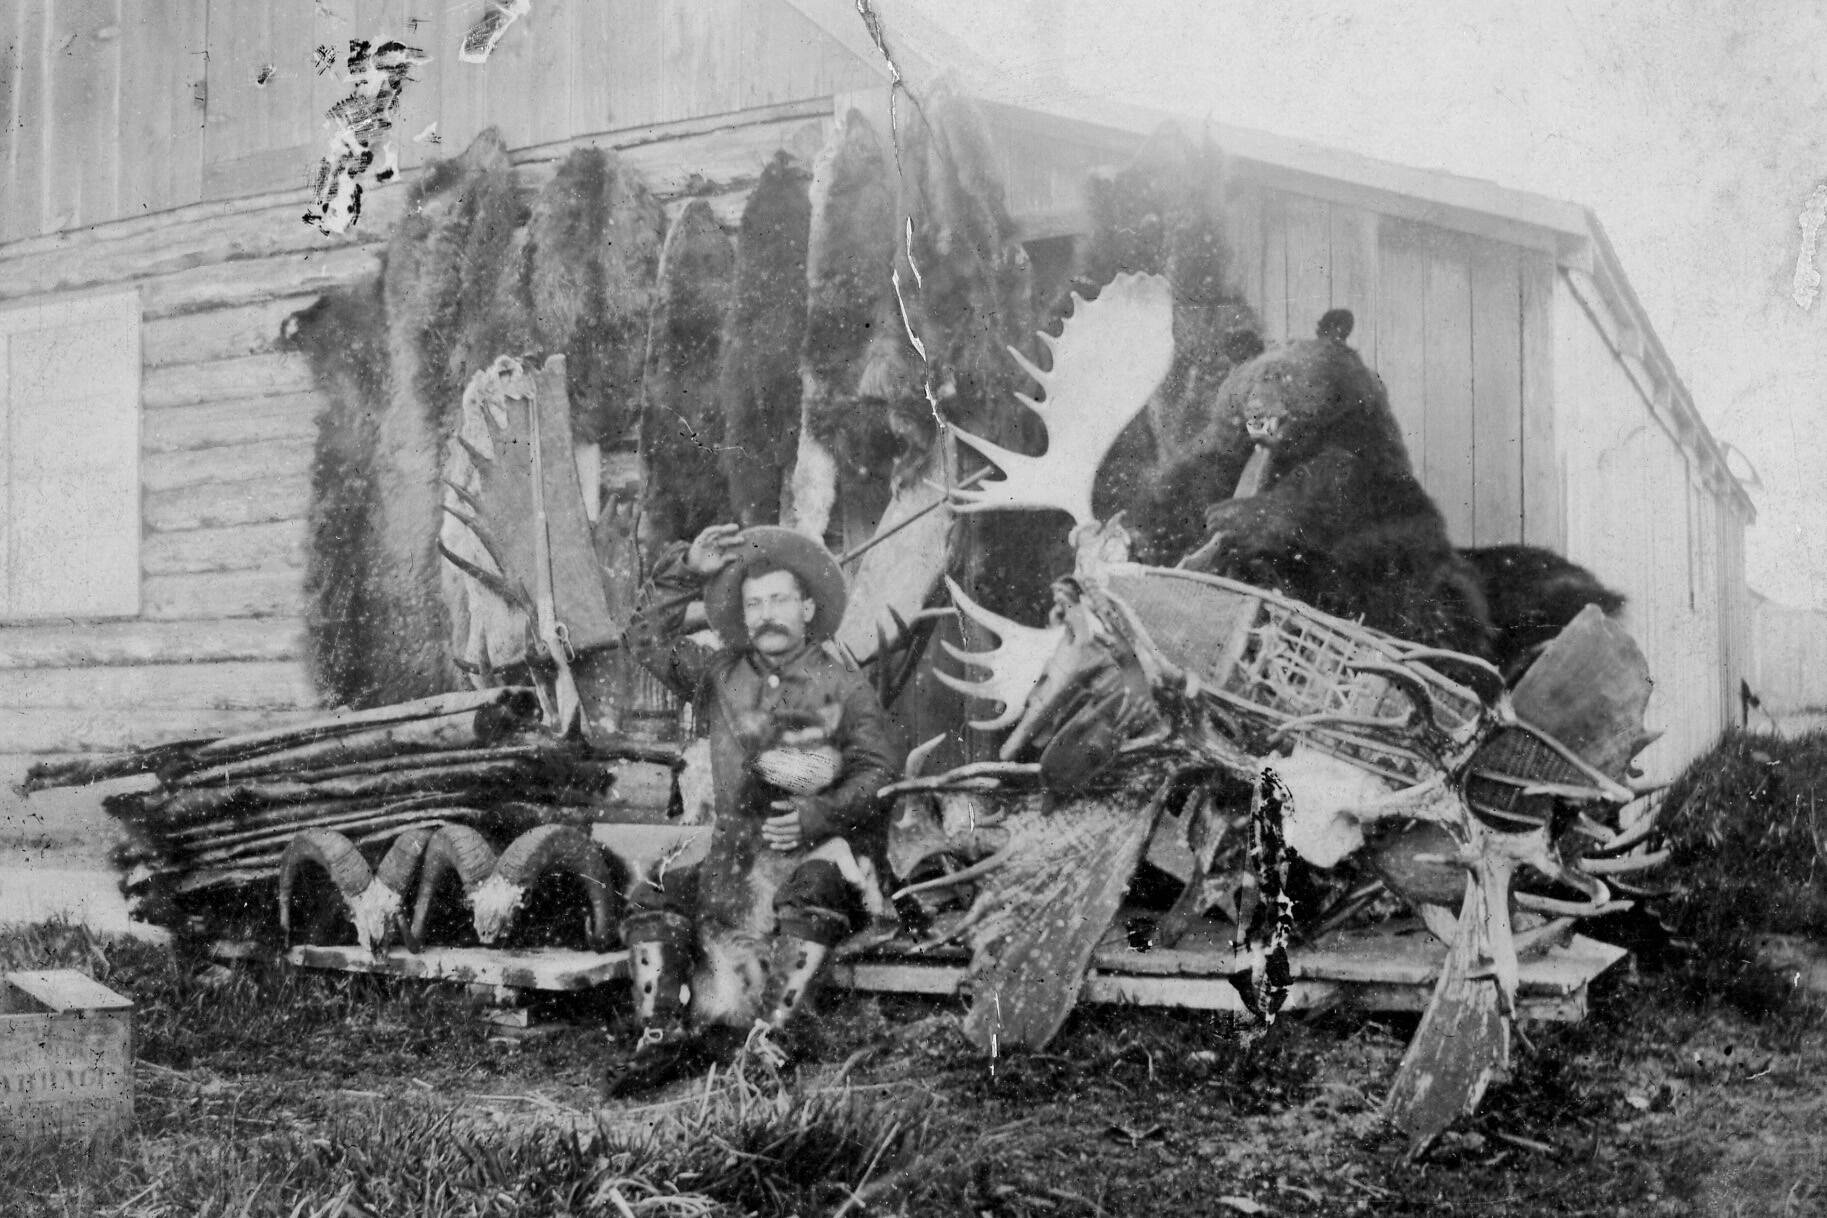 Frenchy posed with this heap of hunting and trapping trophies in Kenai in 1899. (Photo courtesy of the Viani Family Collection)